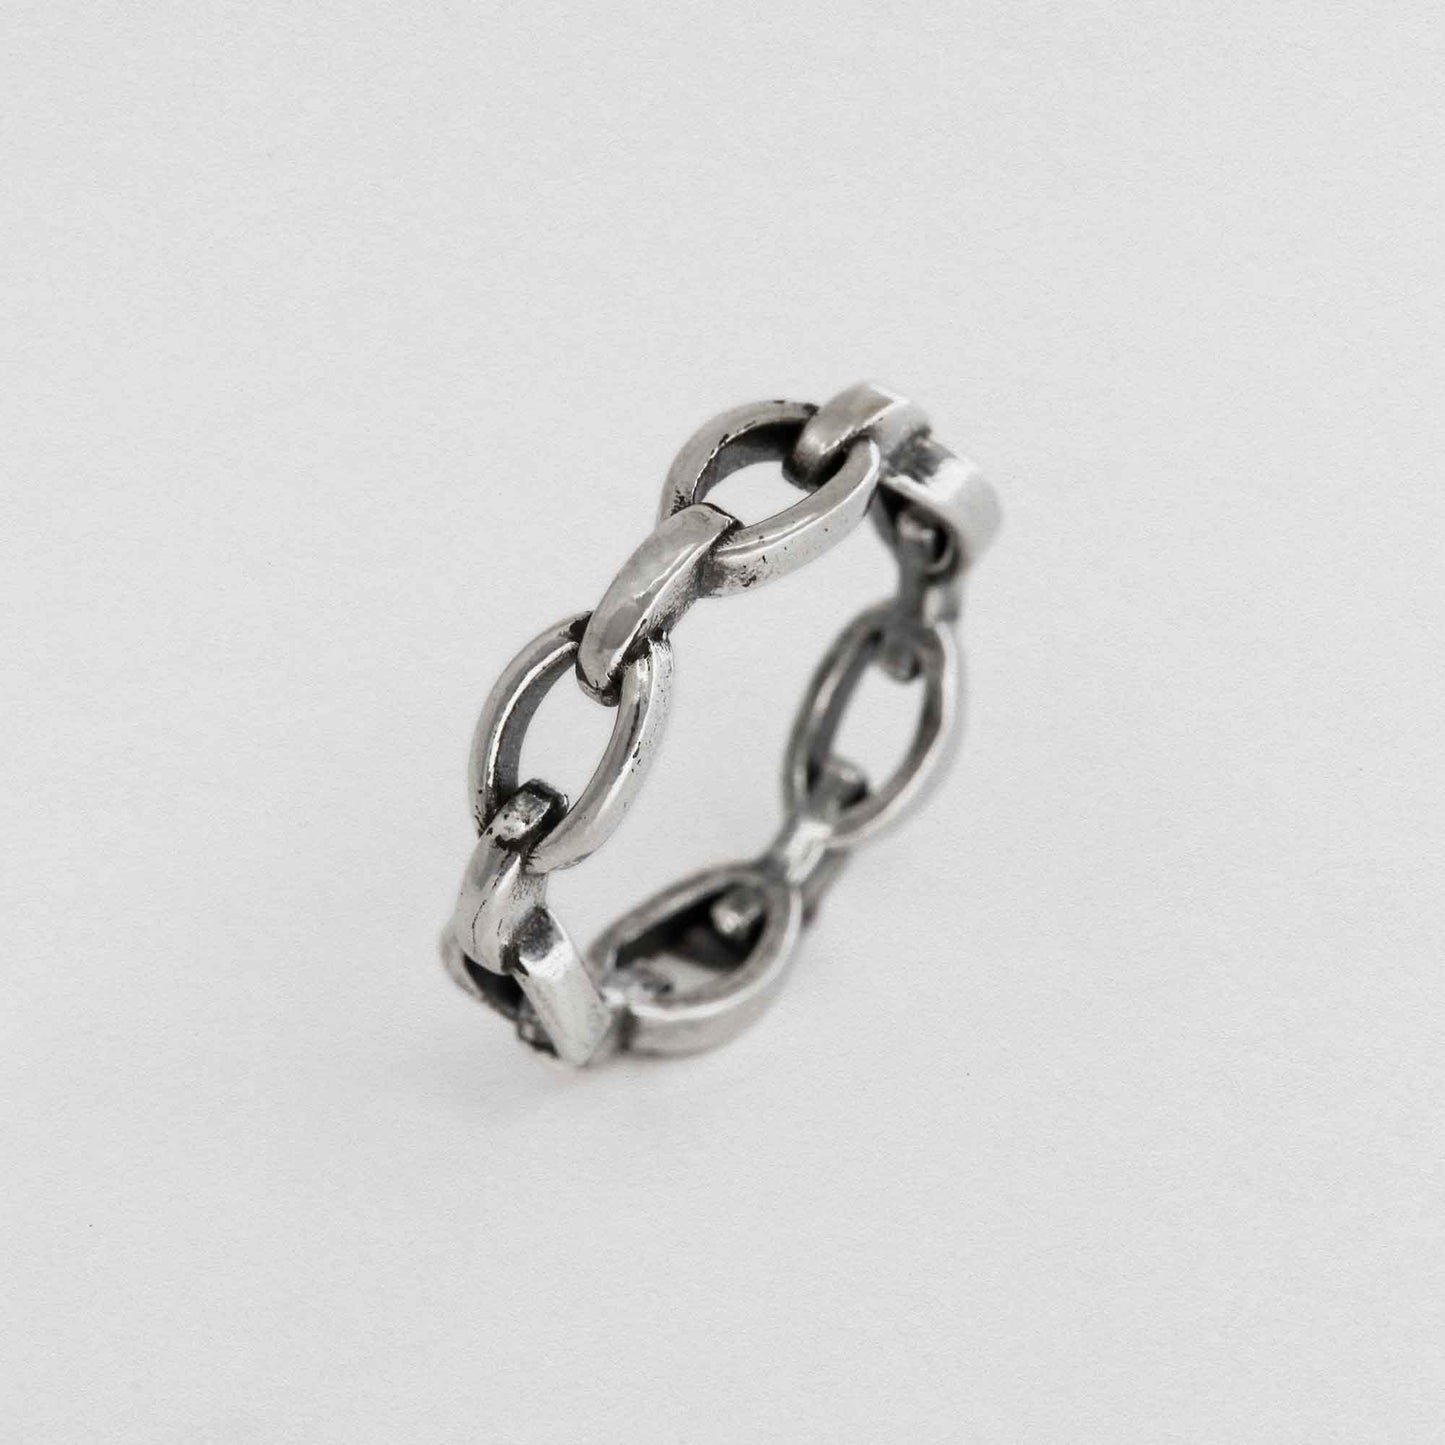 Mens Ring Of Chain Links In 925 Silver